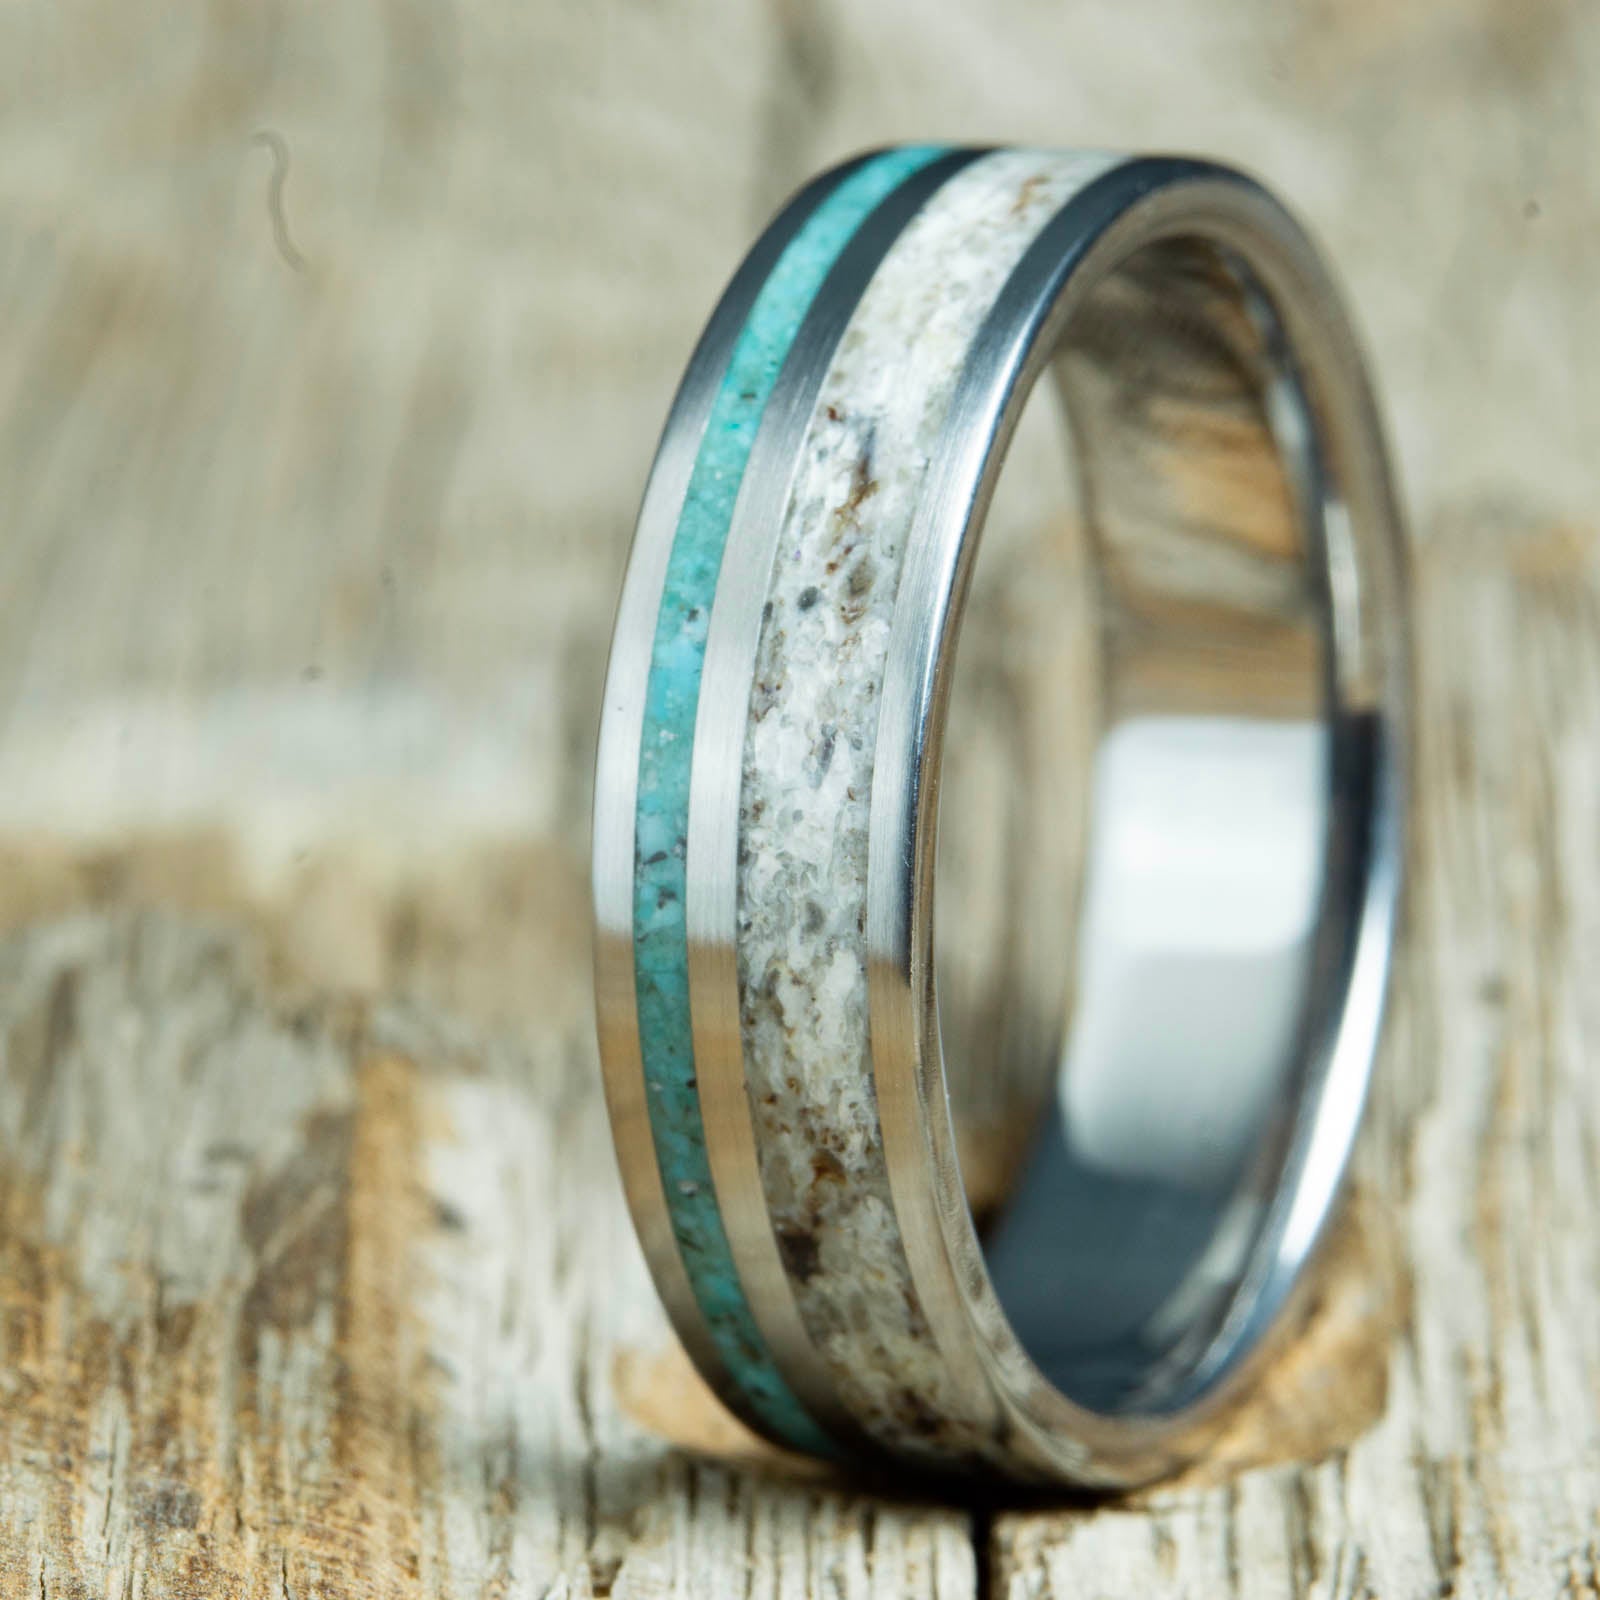 Antler ring with offset turquoise pinstripe inlay on polished titanium band